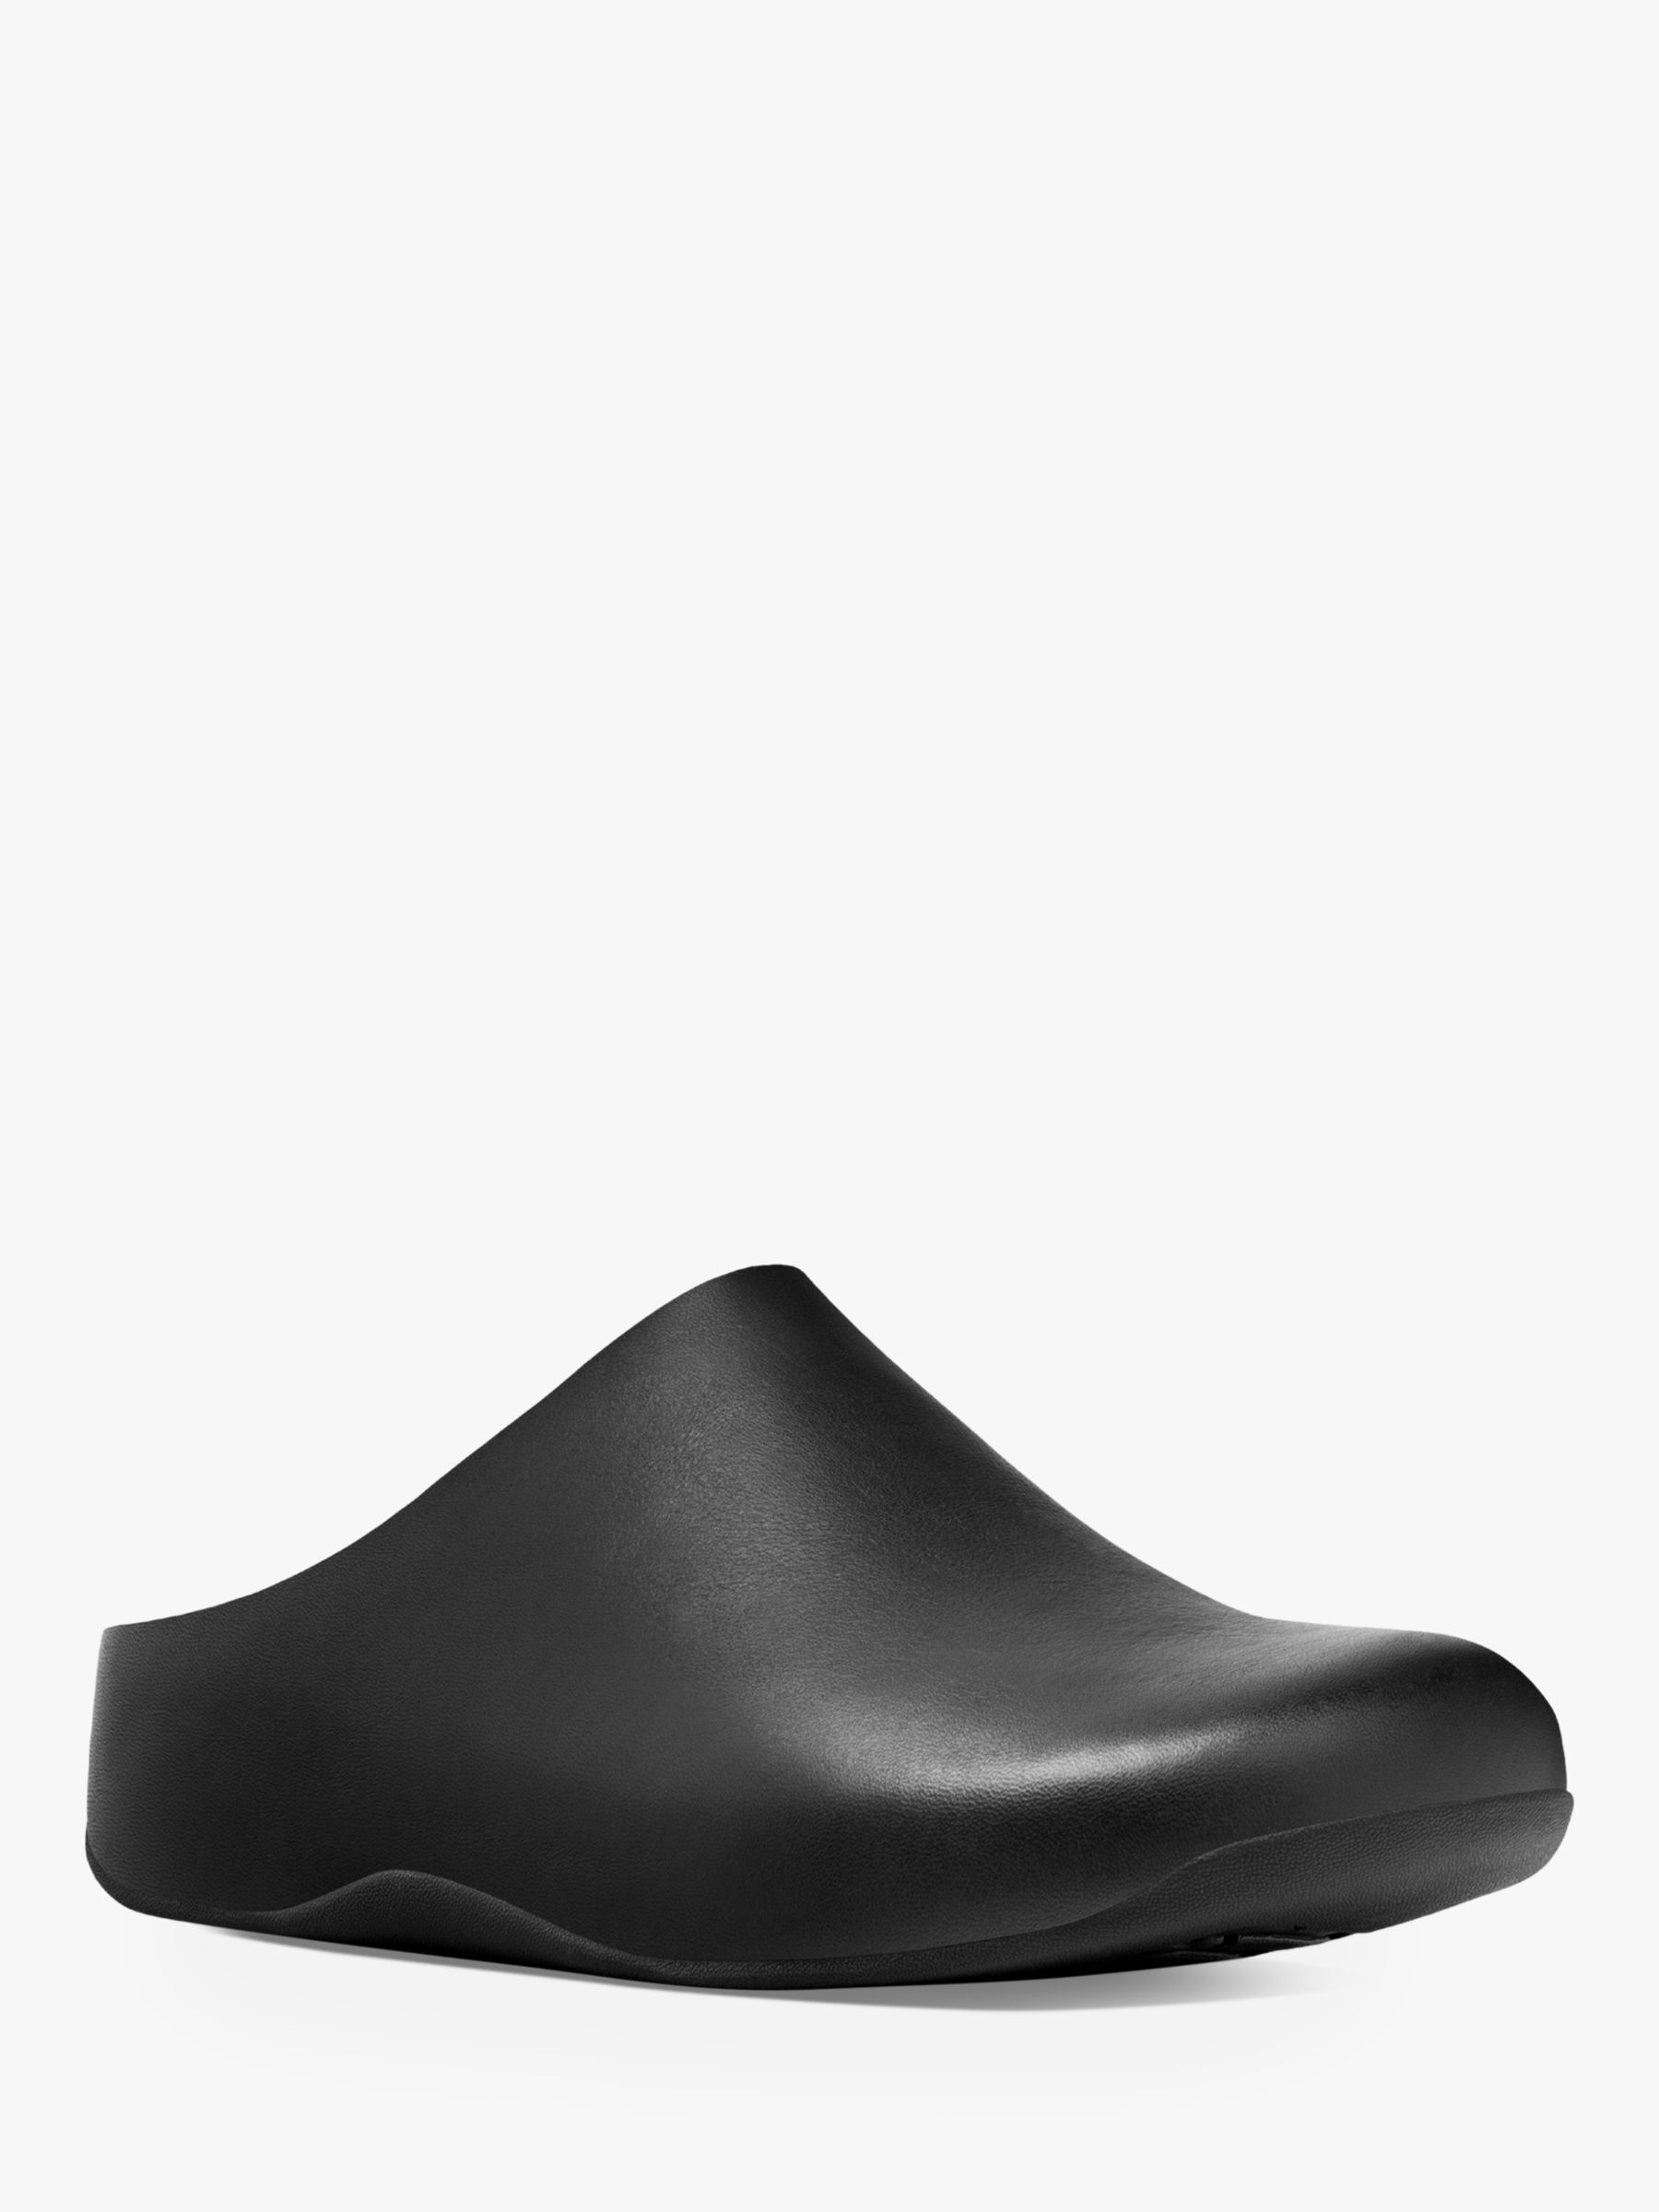 FitFlop Shuv Leather Clogs, Black at John Lewis & Partners